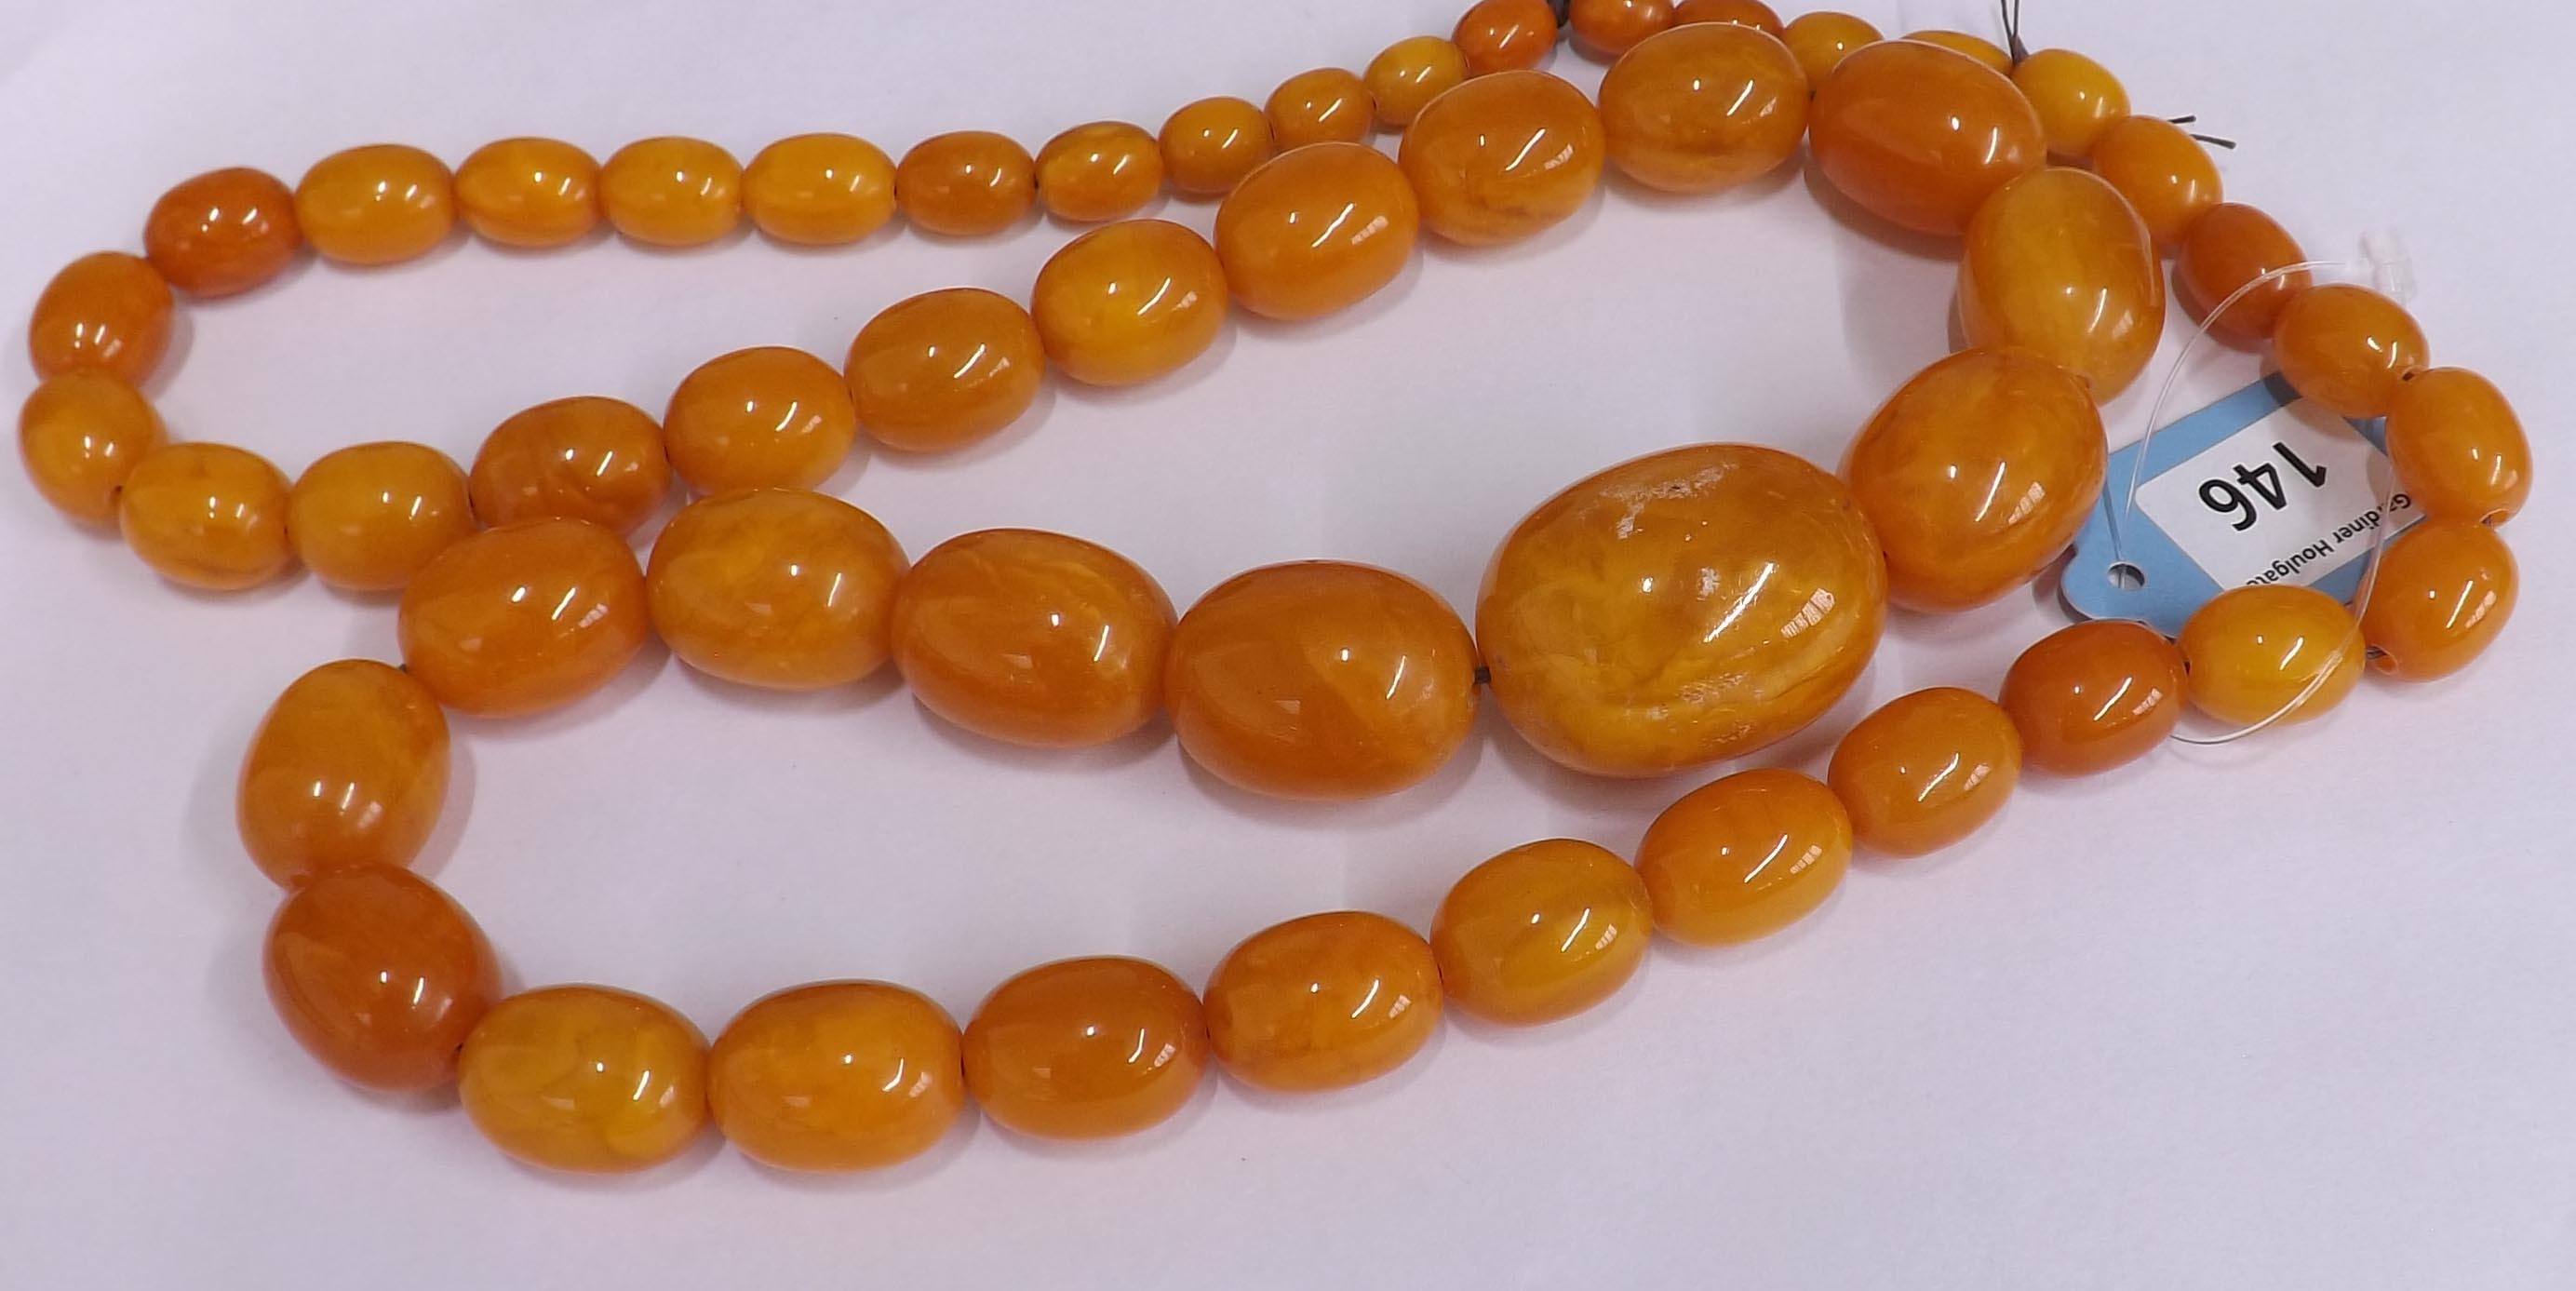 Graduated butterscotch amber bead necklace, consisting of 51 beads, 99.3gm, 10mm- 33mm, 30" long - Image 4 of 7